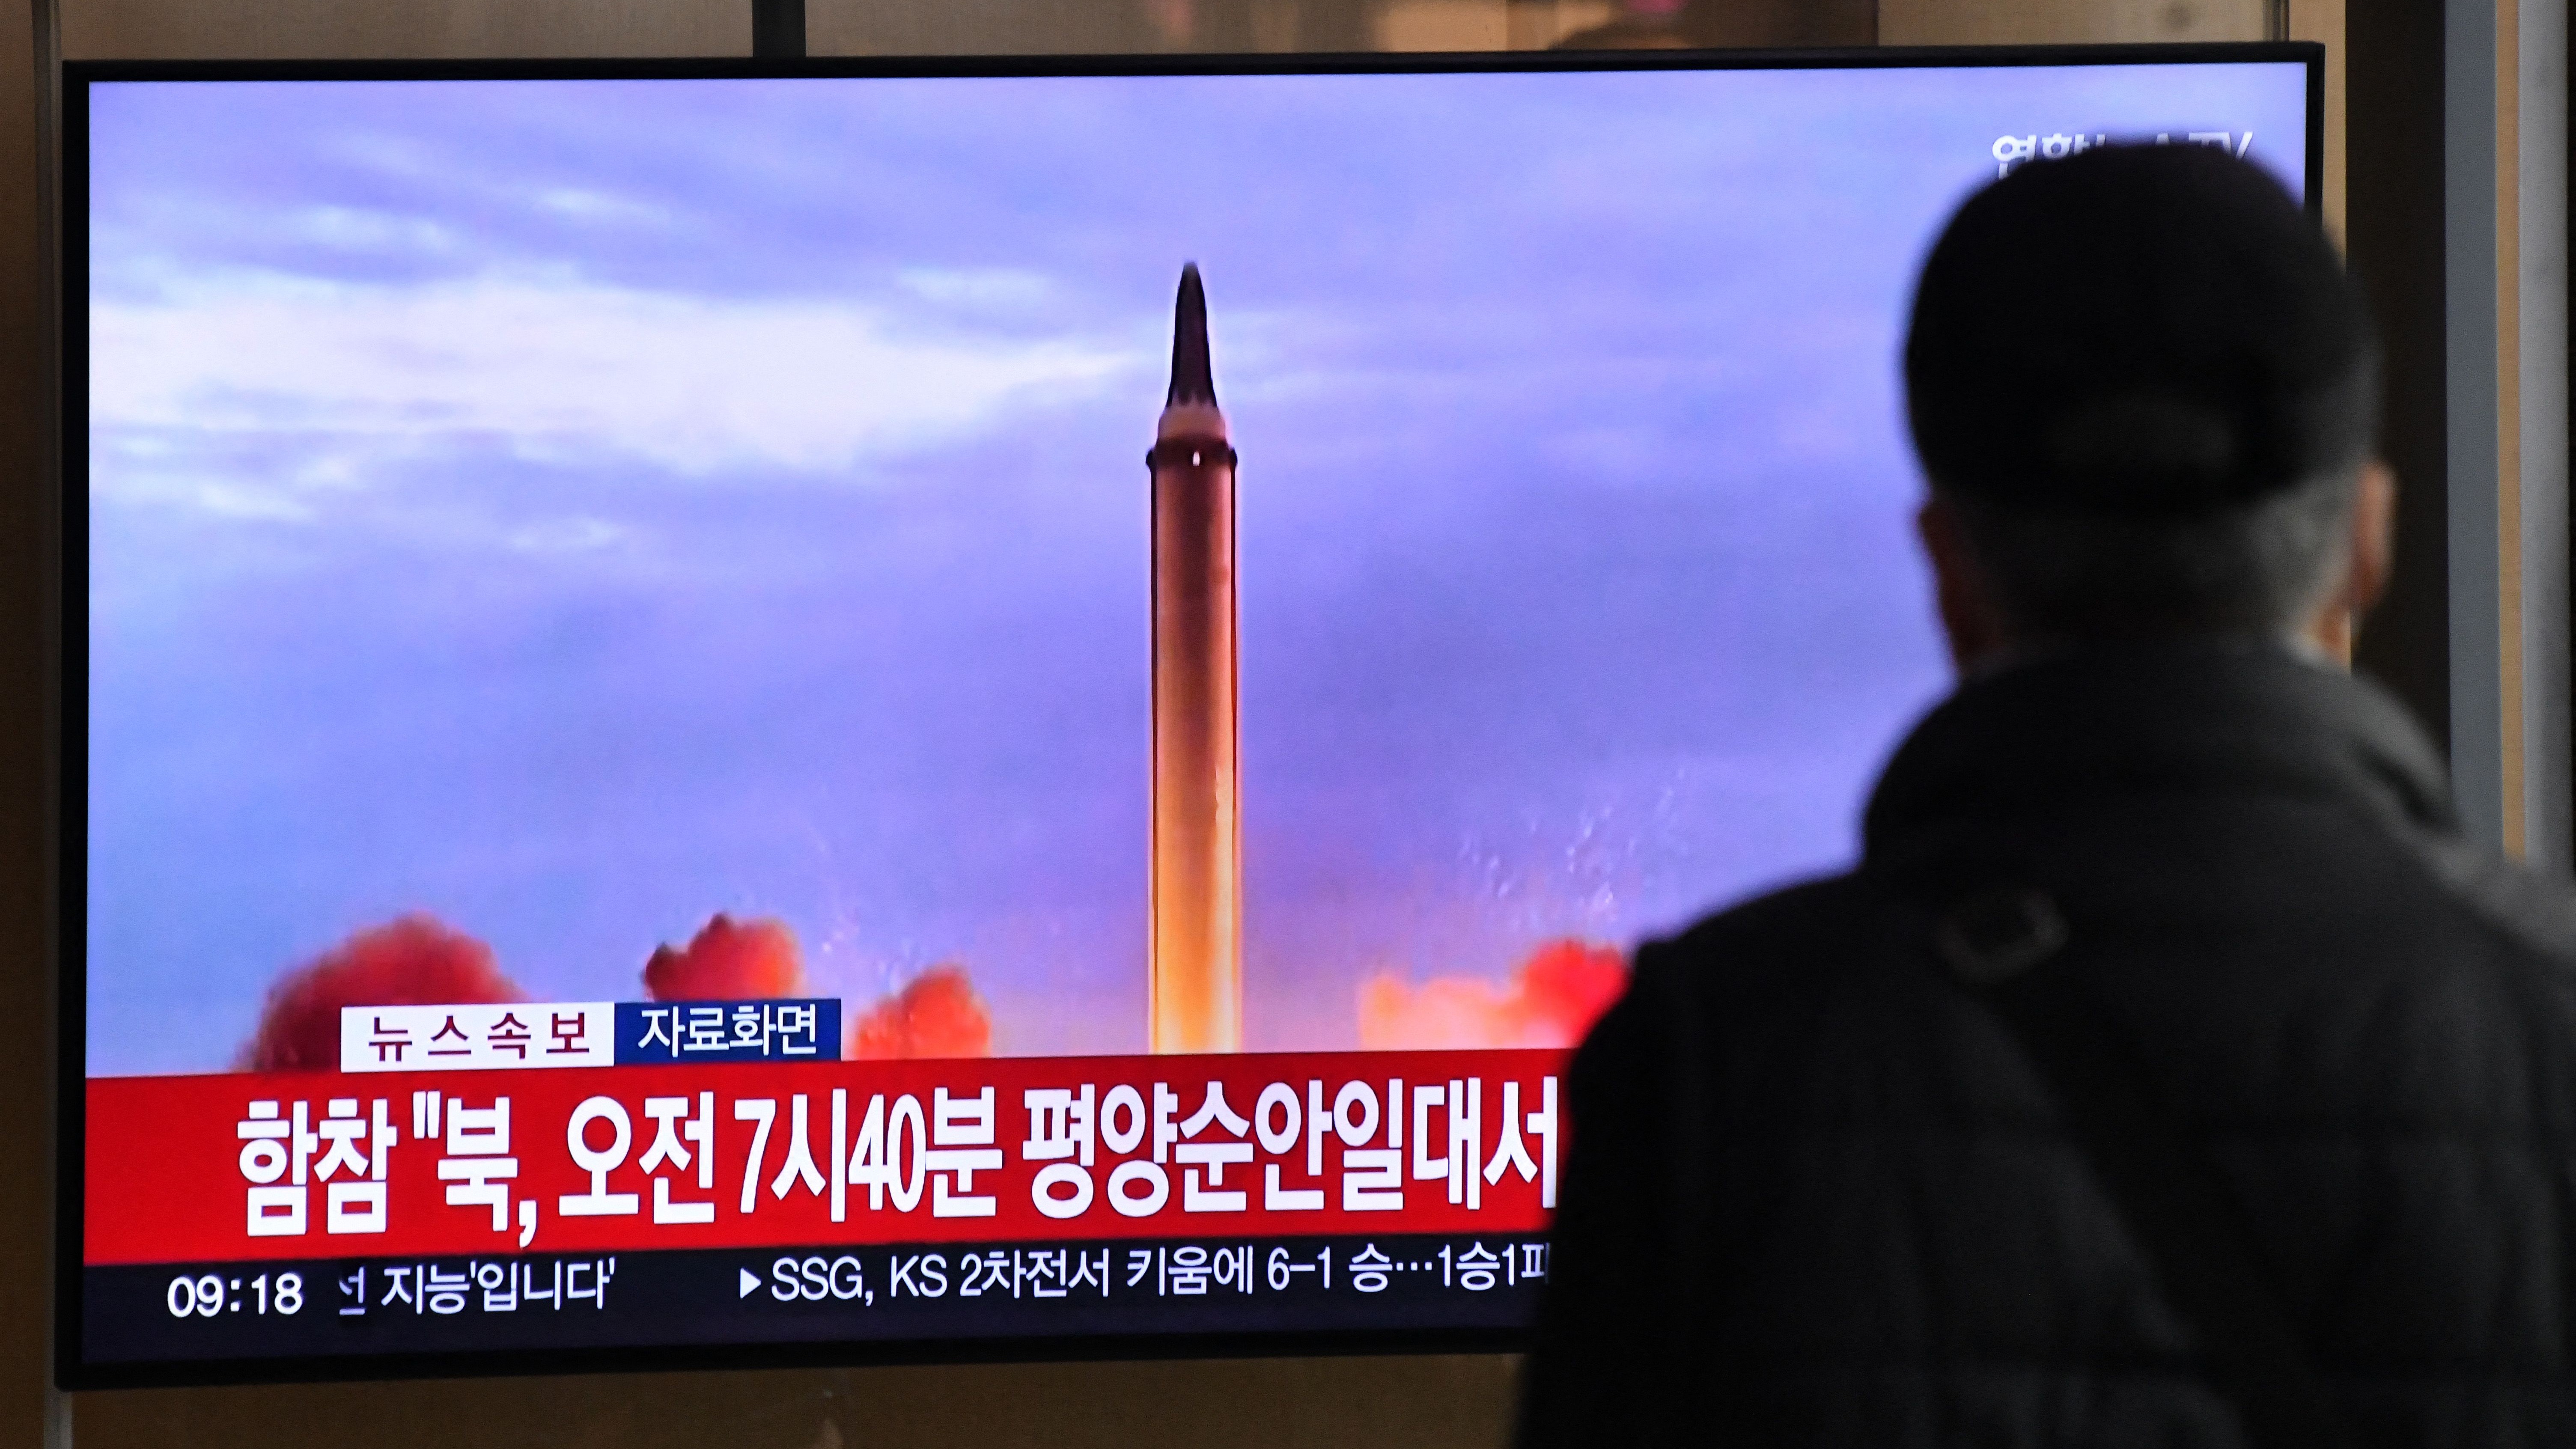 A passerby in Seoul, South Korea watches footage of a North Korean missile blasting off on Nov. 3, 2022.